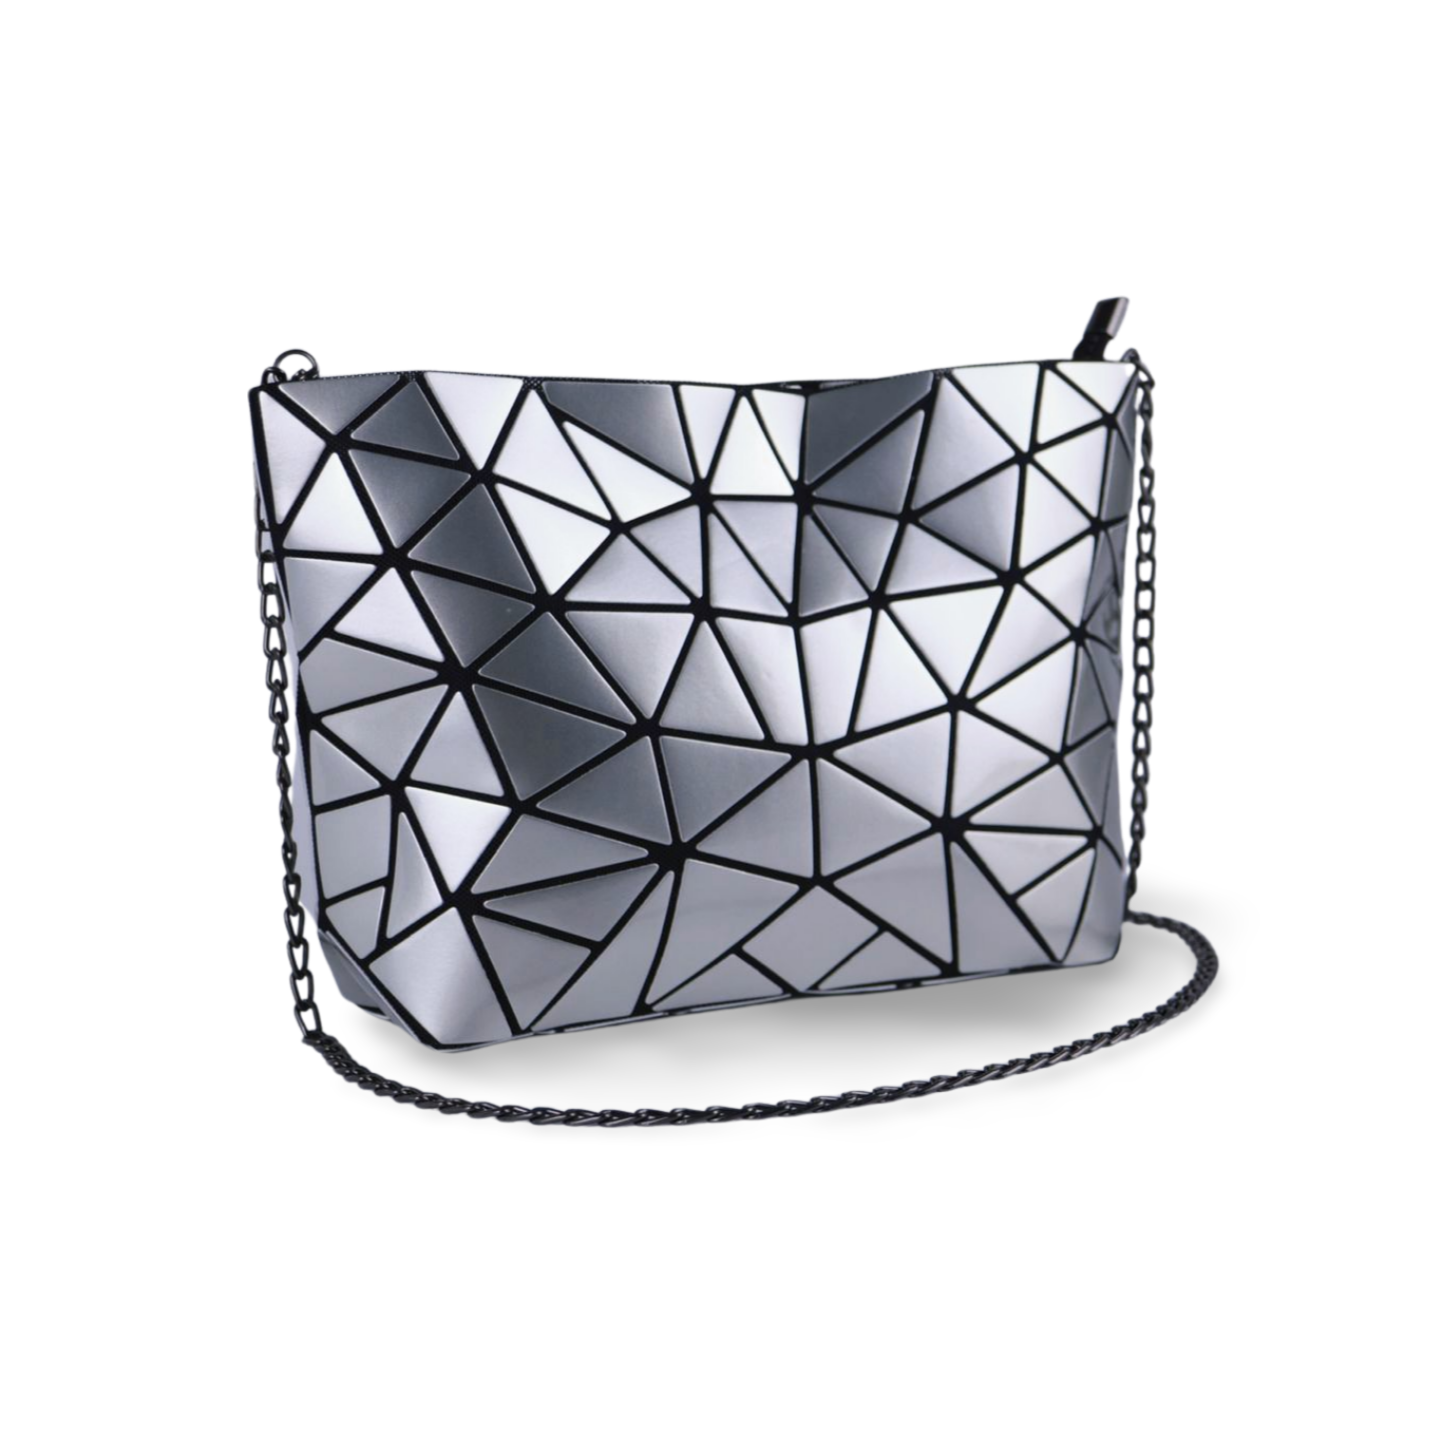 High-Quality Luminous Geometric Holographic Crossbody Bag With Chain for Women